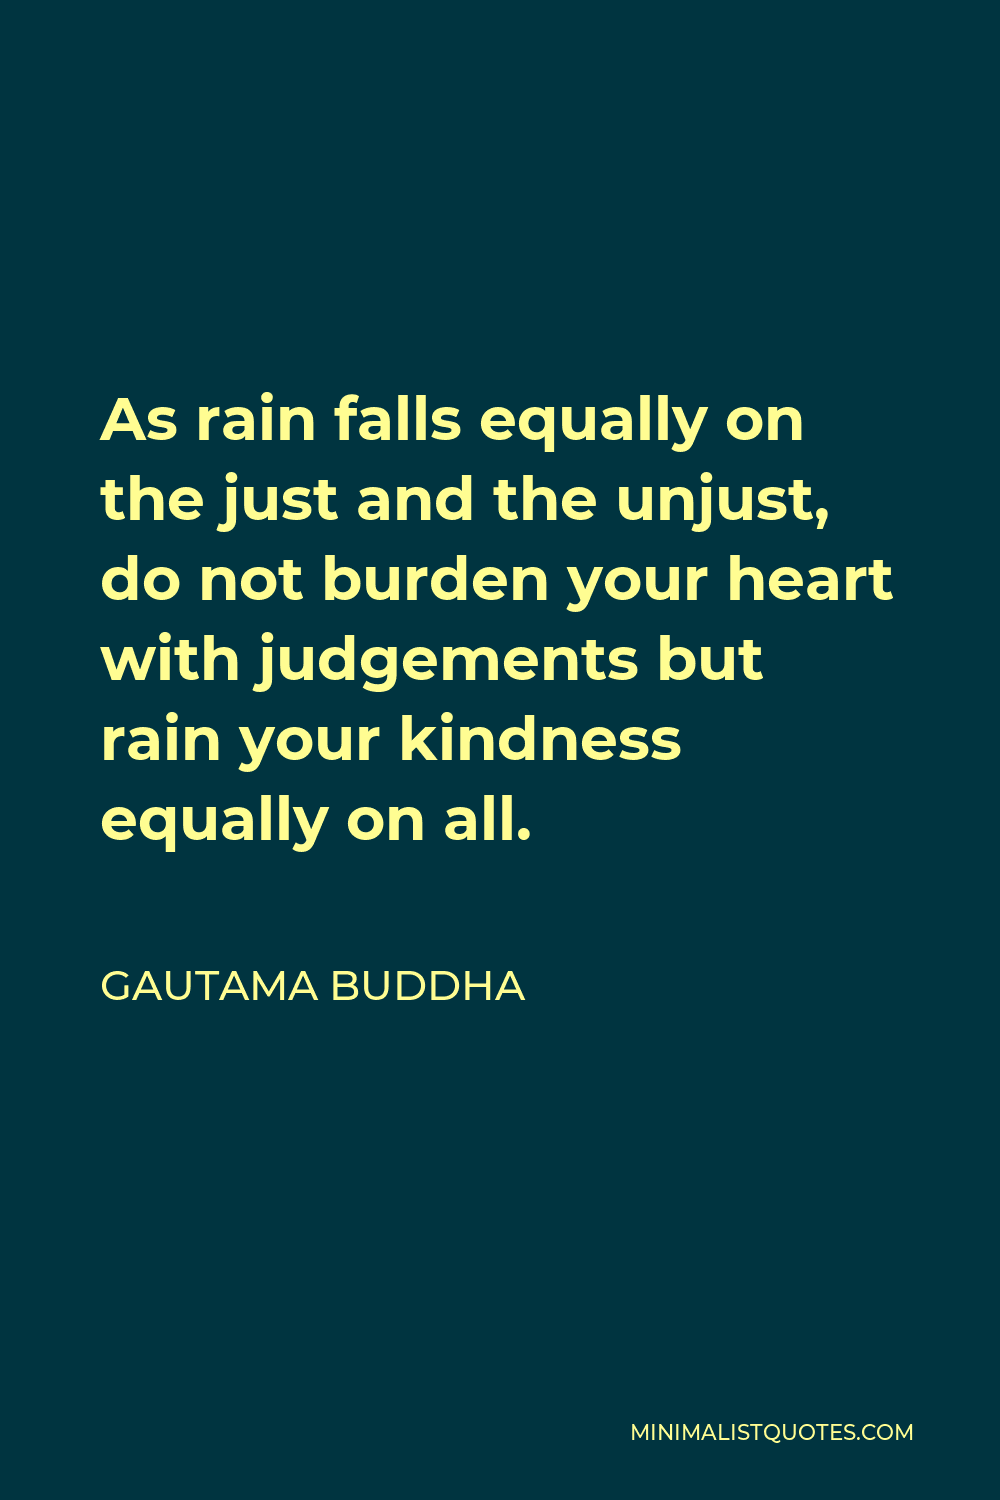 Gautama Buddha Quote - As rain falls equally on the just and the unjust, do not burden your heart with judgements but rain your kindness equally on all.